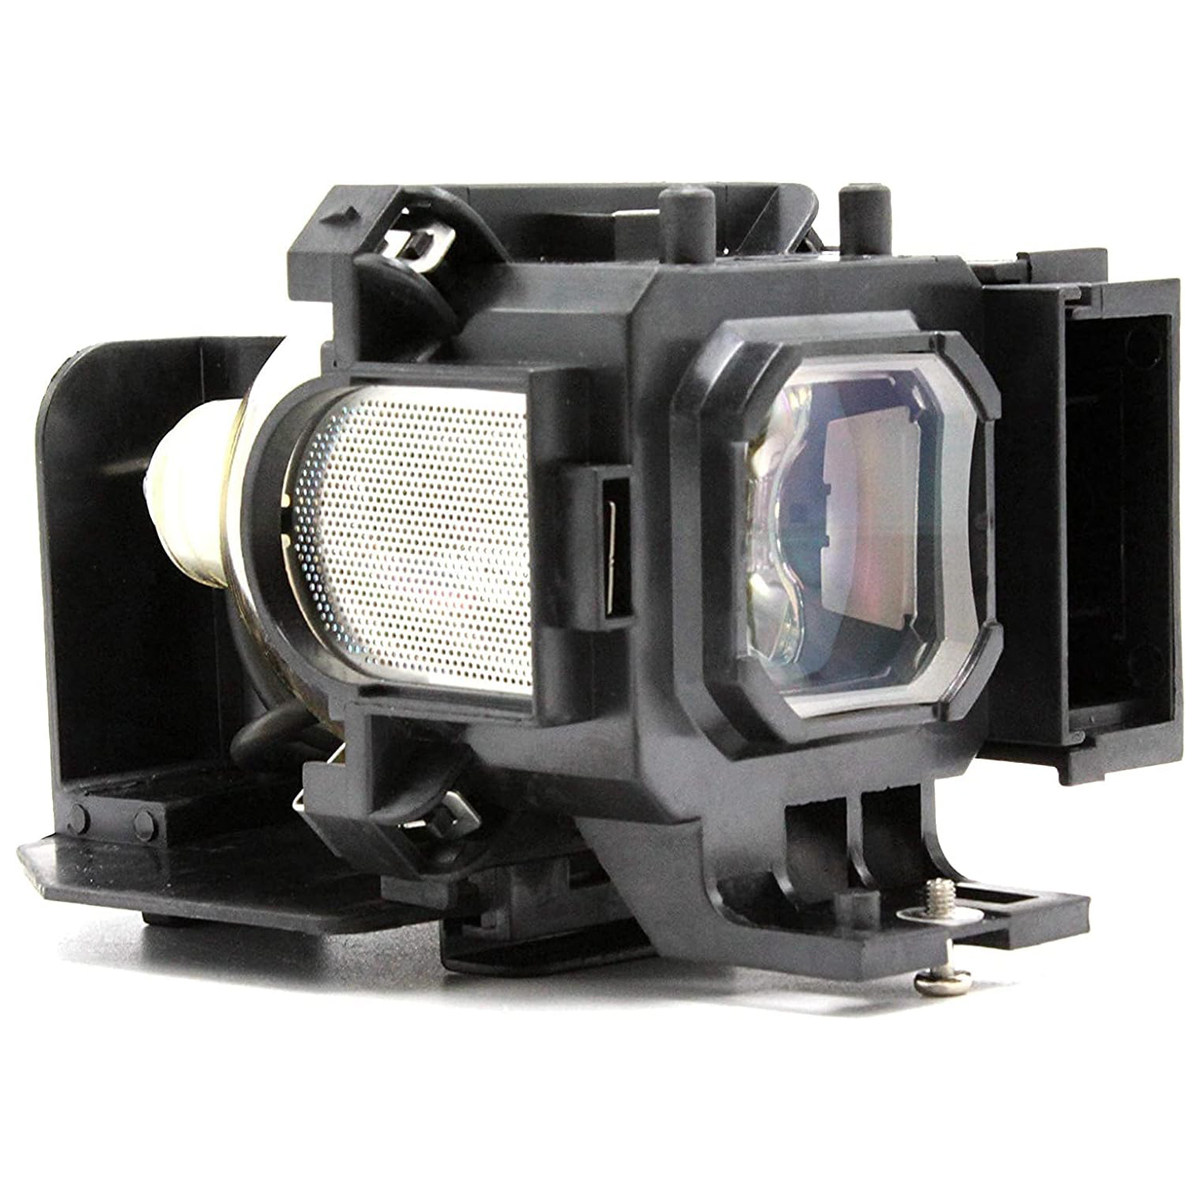 Replacement Projector lamp 456-8779 For Dukane Projector